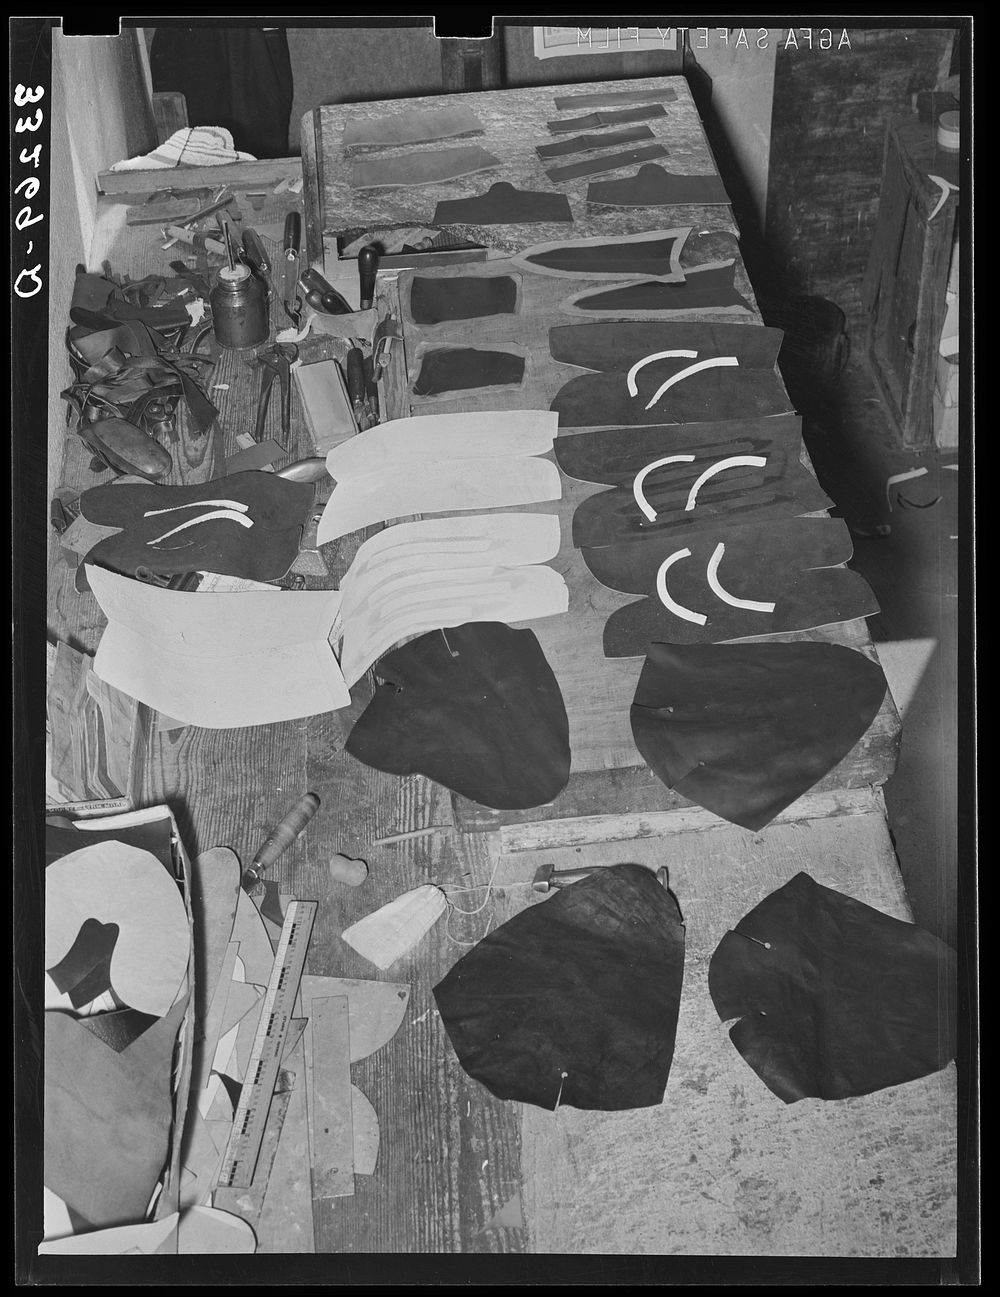 [Untitled photo, possibly related to: All the parts that go into the uppers of a pair of boots. Boot shop, Alpine, Texas] by…